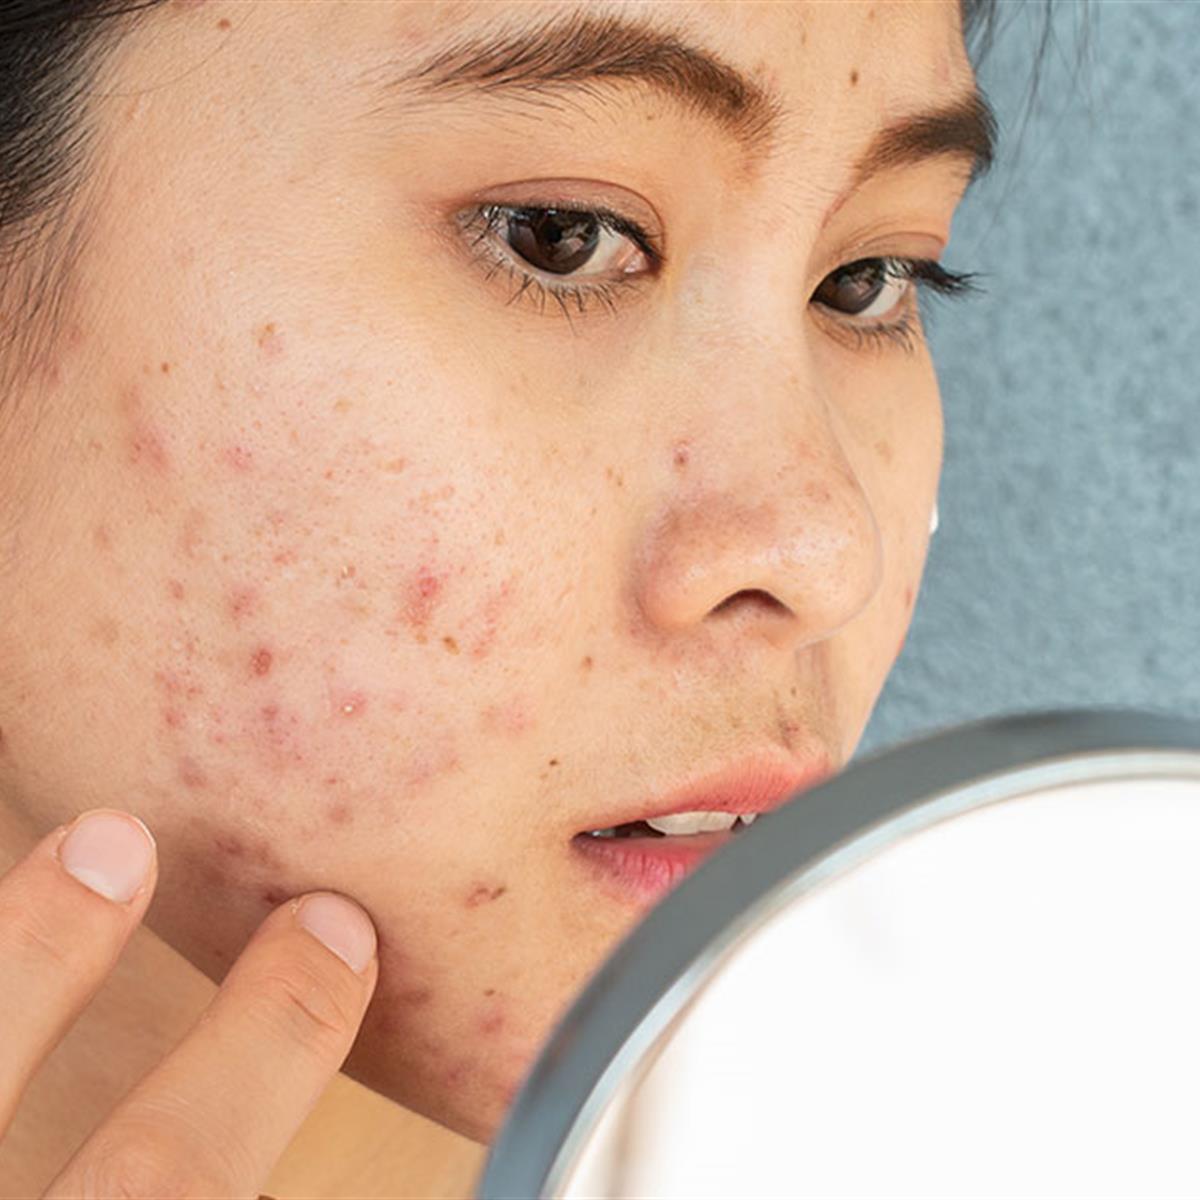 Teen Acne: How to Treat & Prevent This Common Skin Condition